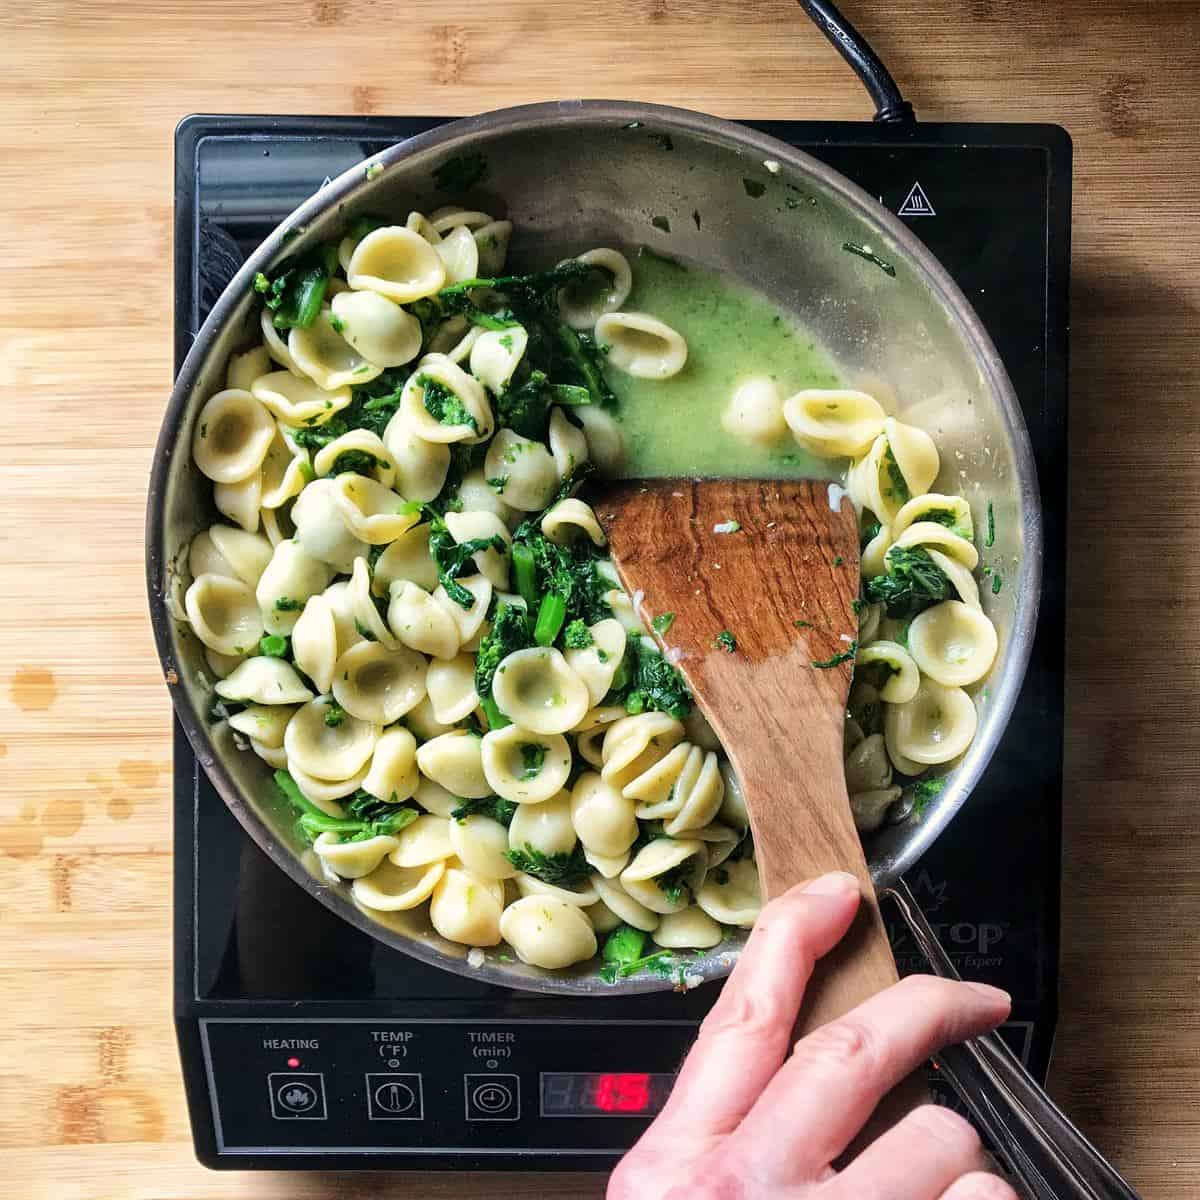 Broccoli Rabe Pasta being sauteed together in a pan.